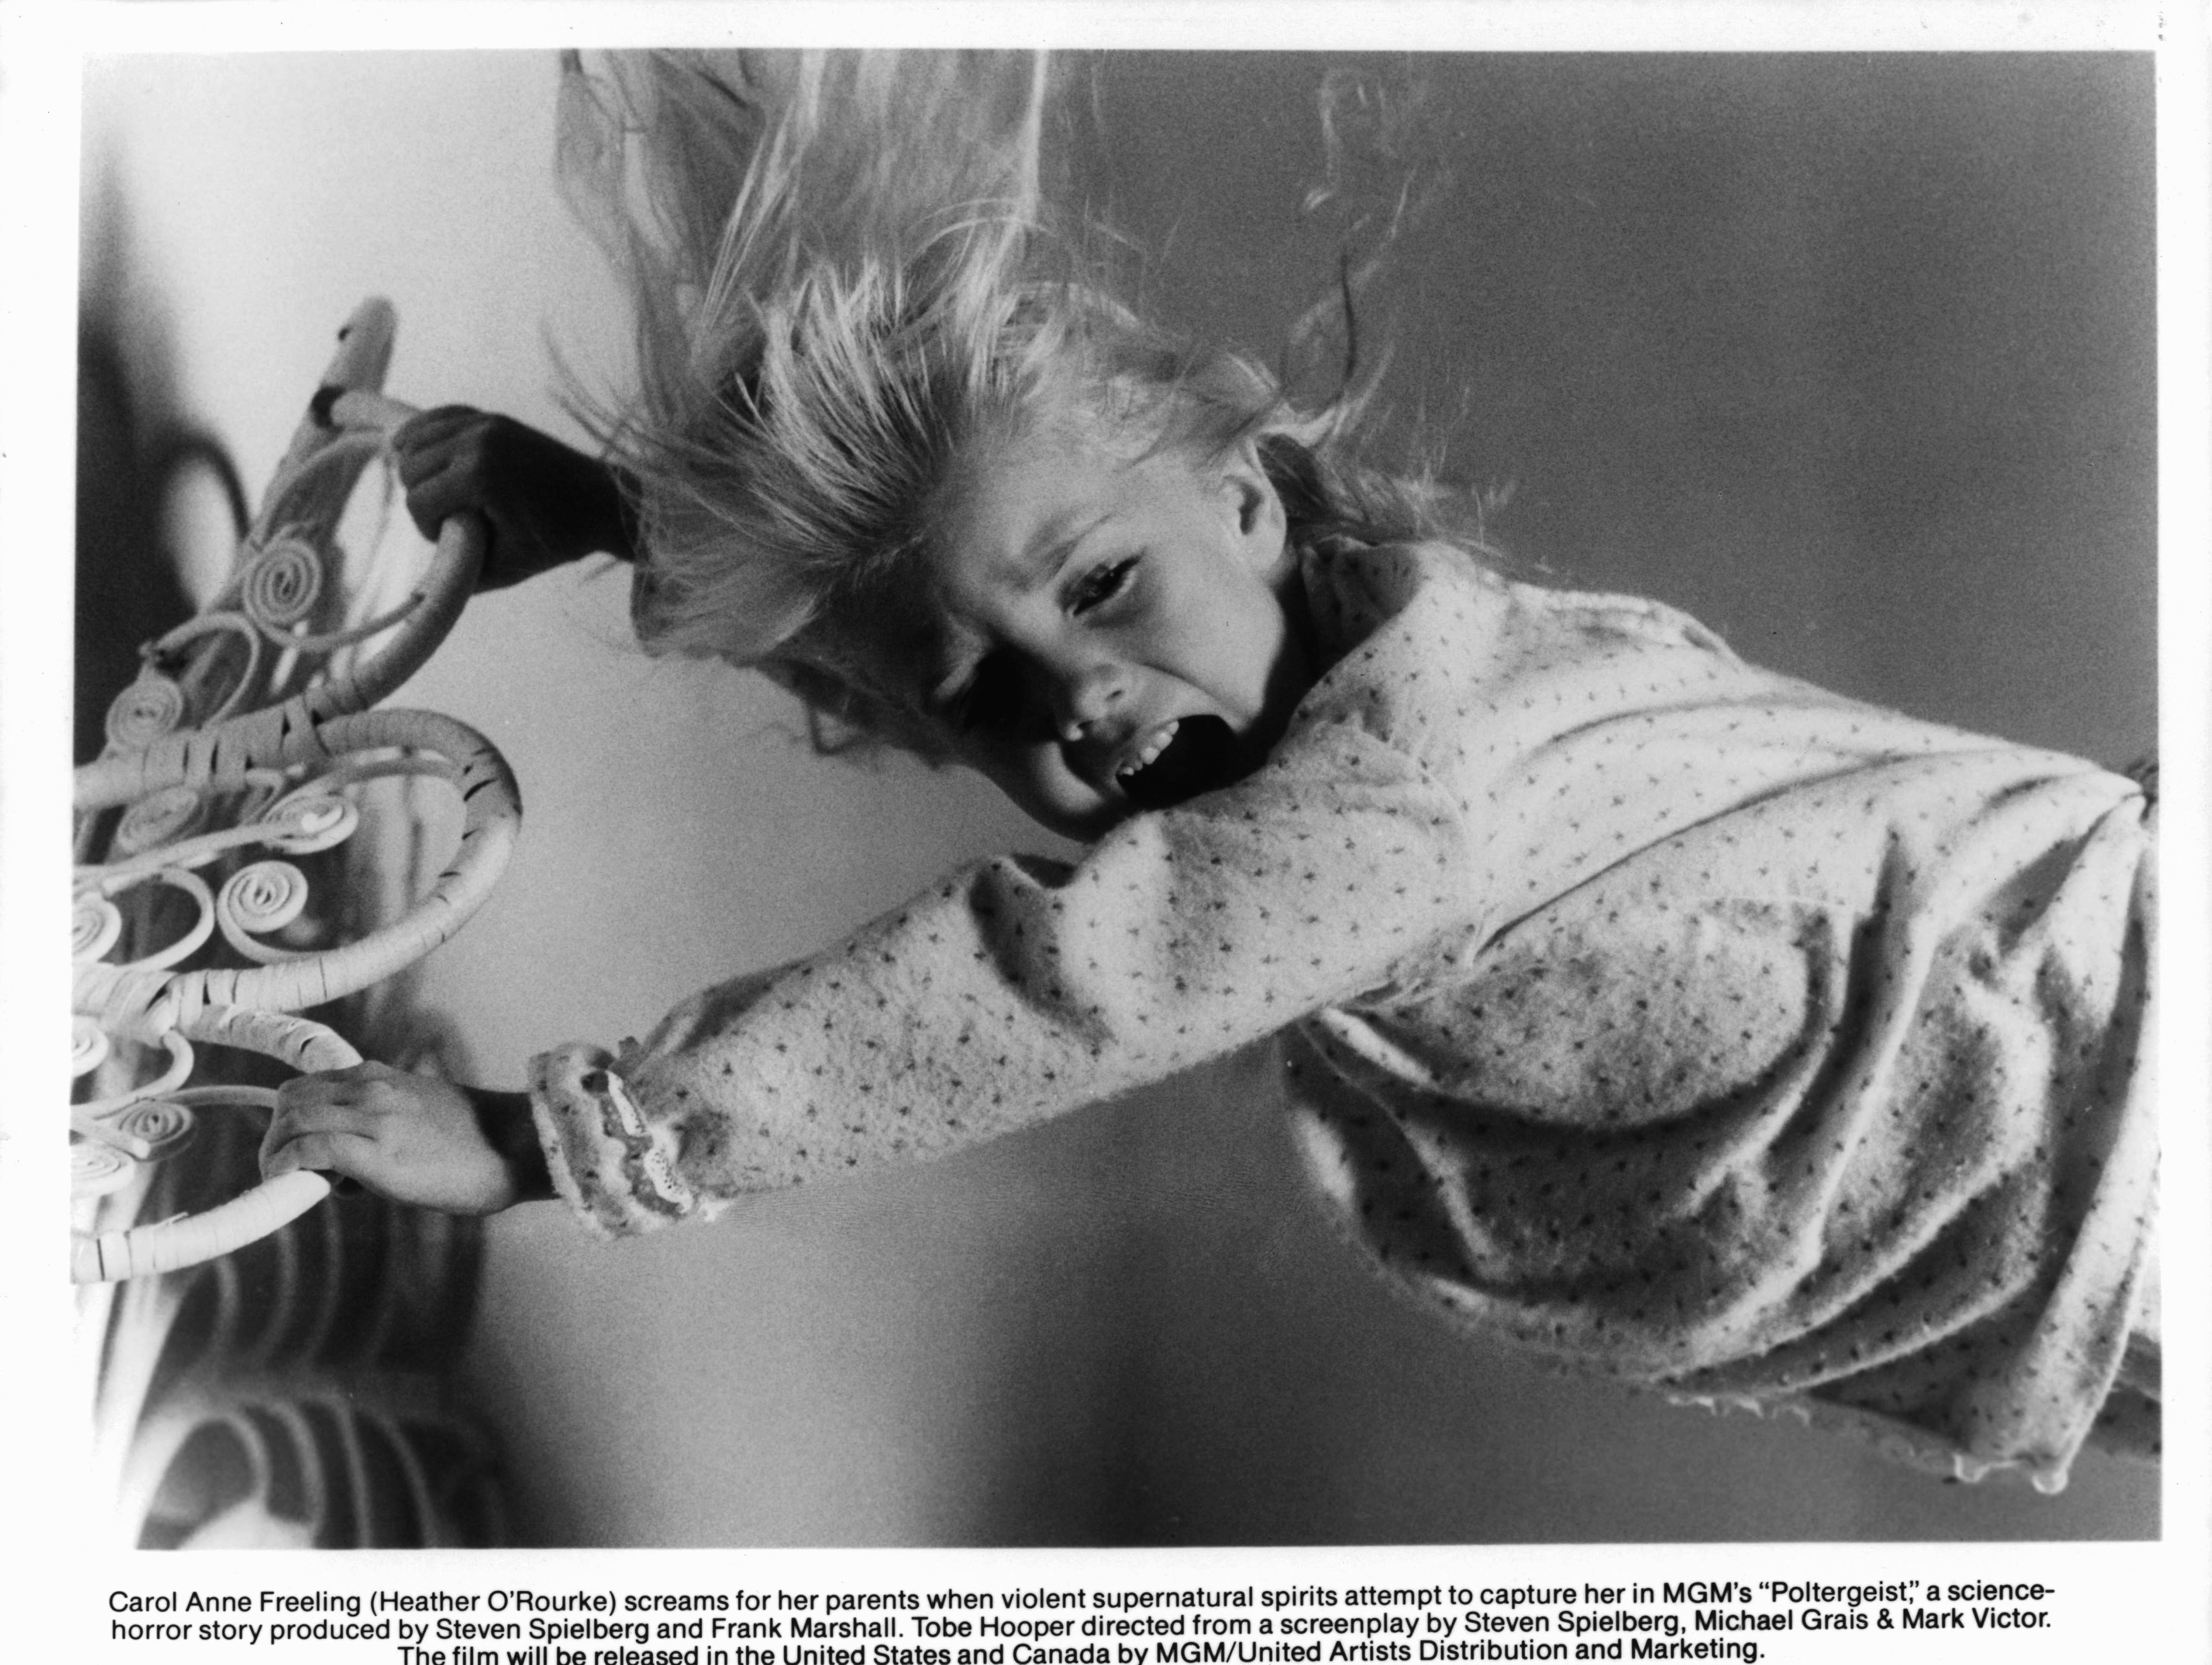 Heather O'Rourke in a scene from the film "Poltergeist" in 1982 | Source: Getty Images